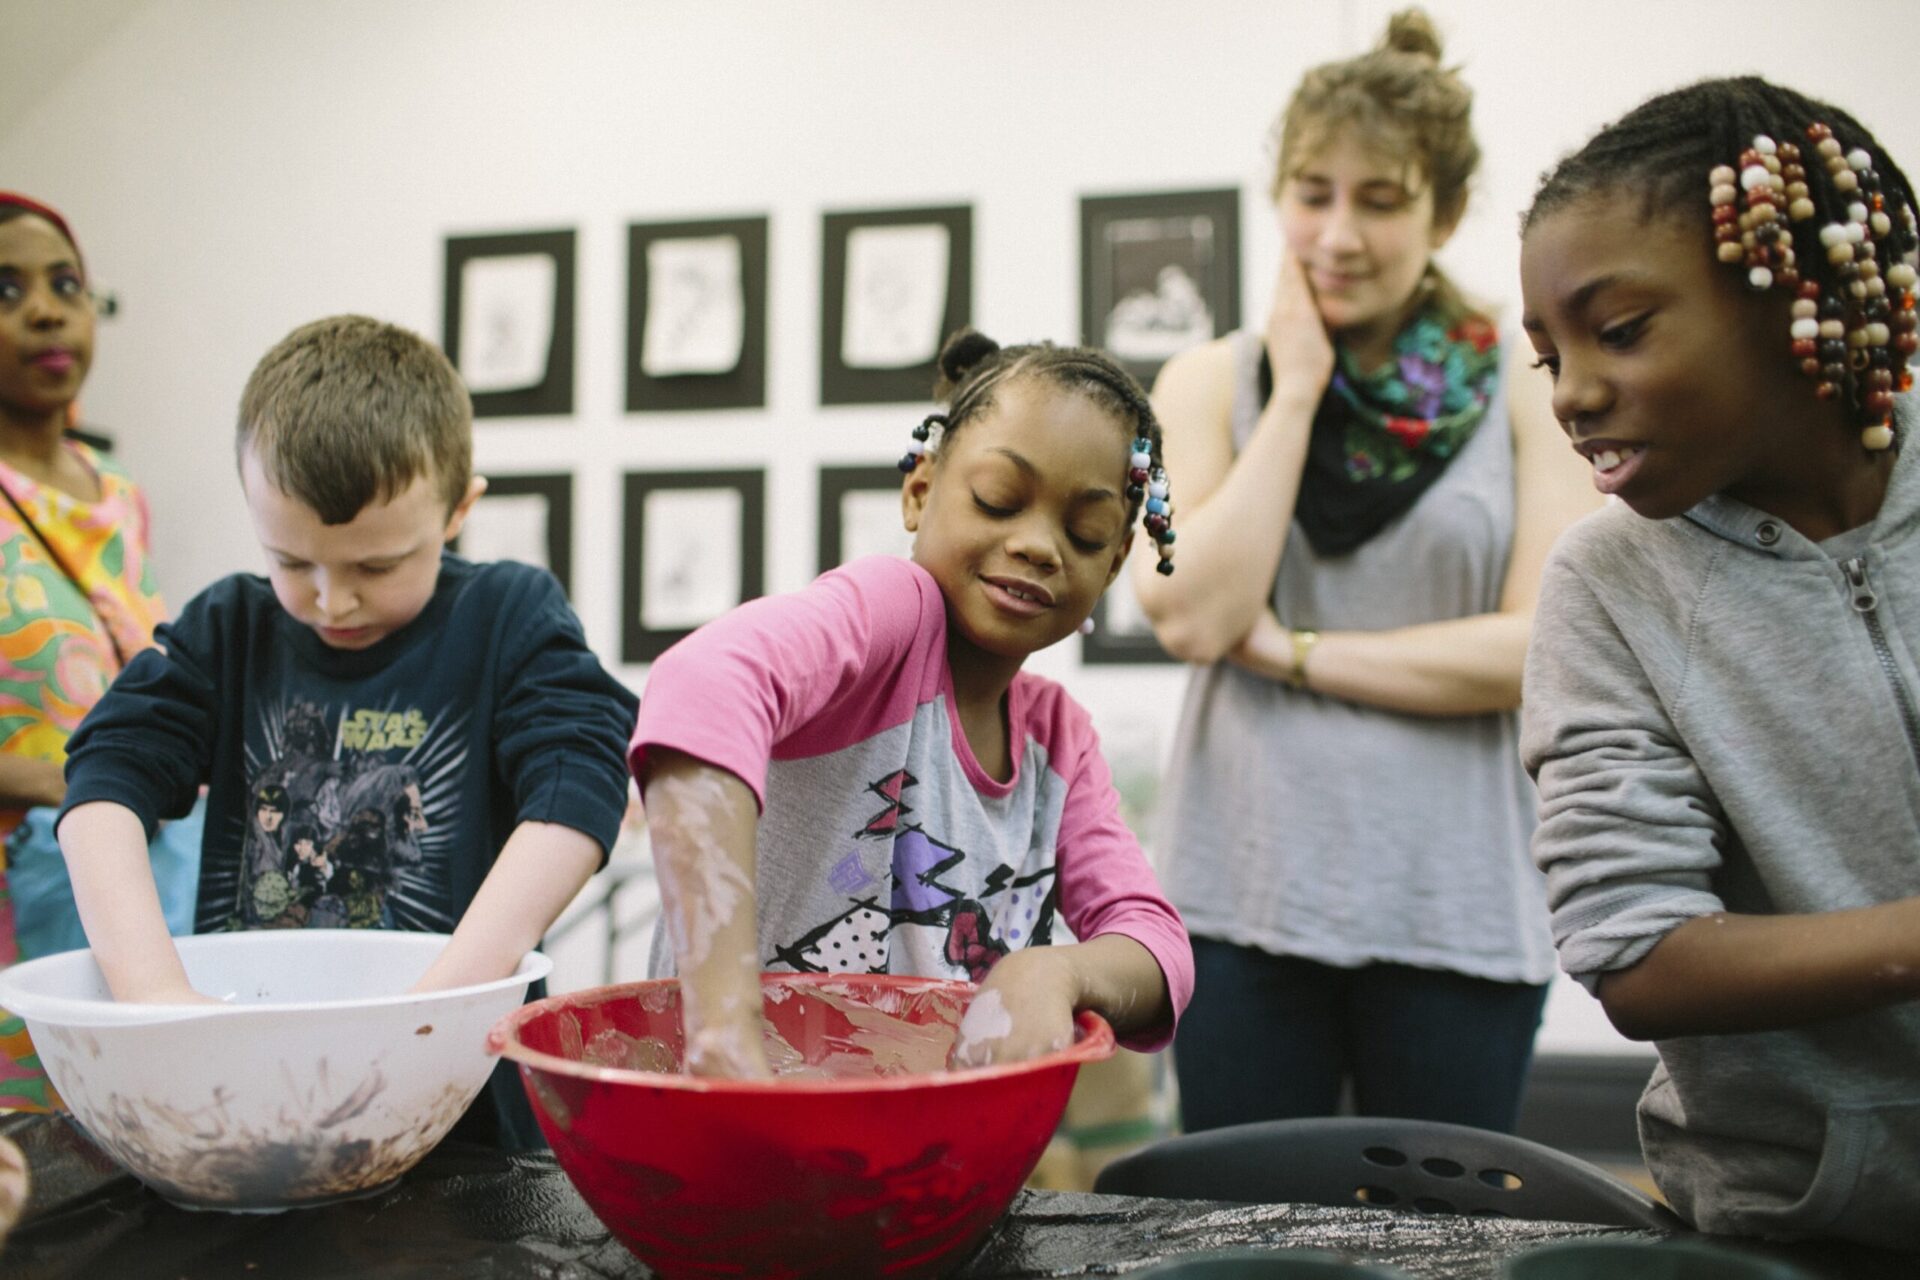 Three children participate in a clay modeling activity at Assemble.